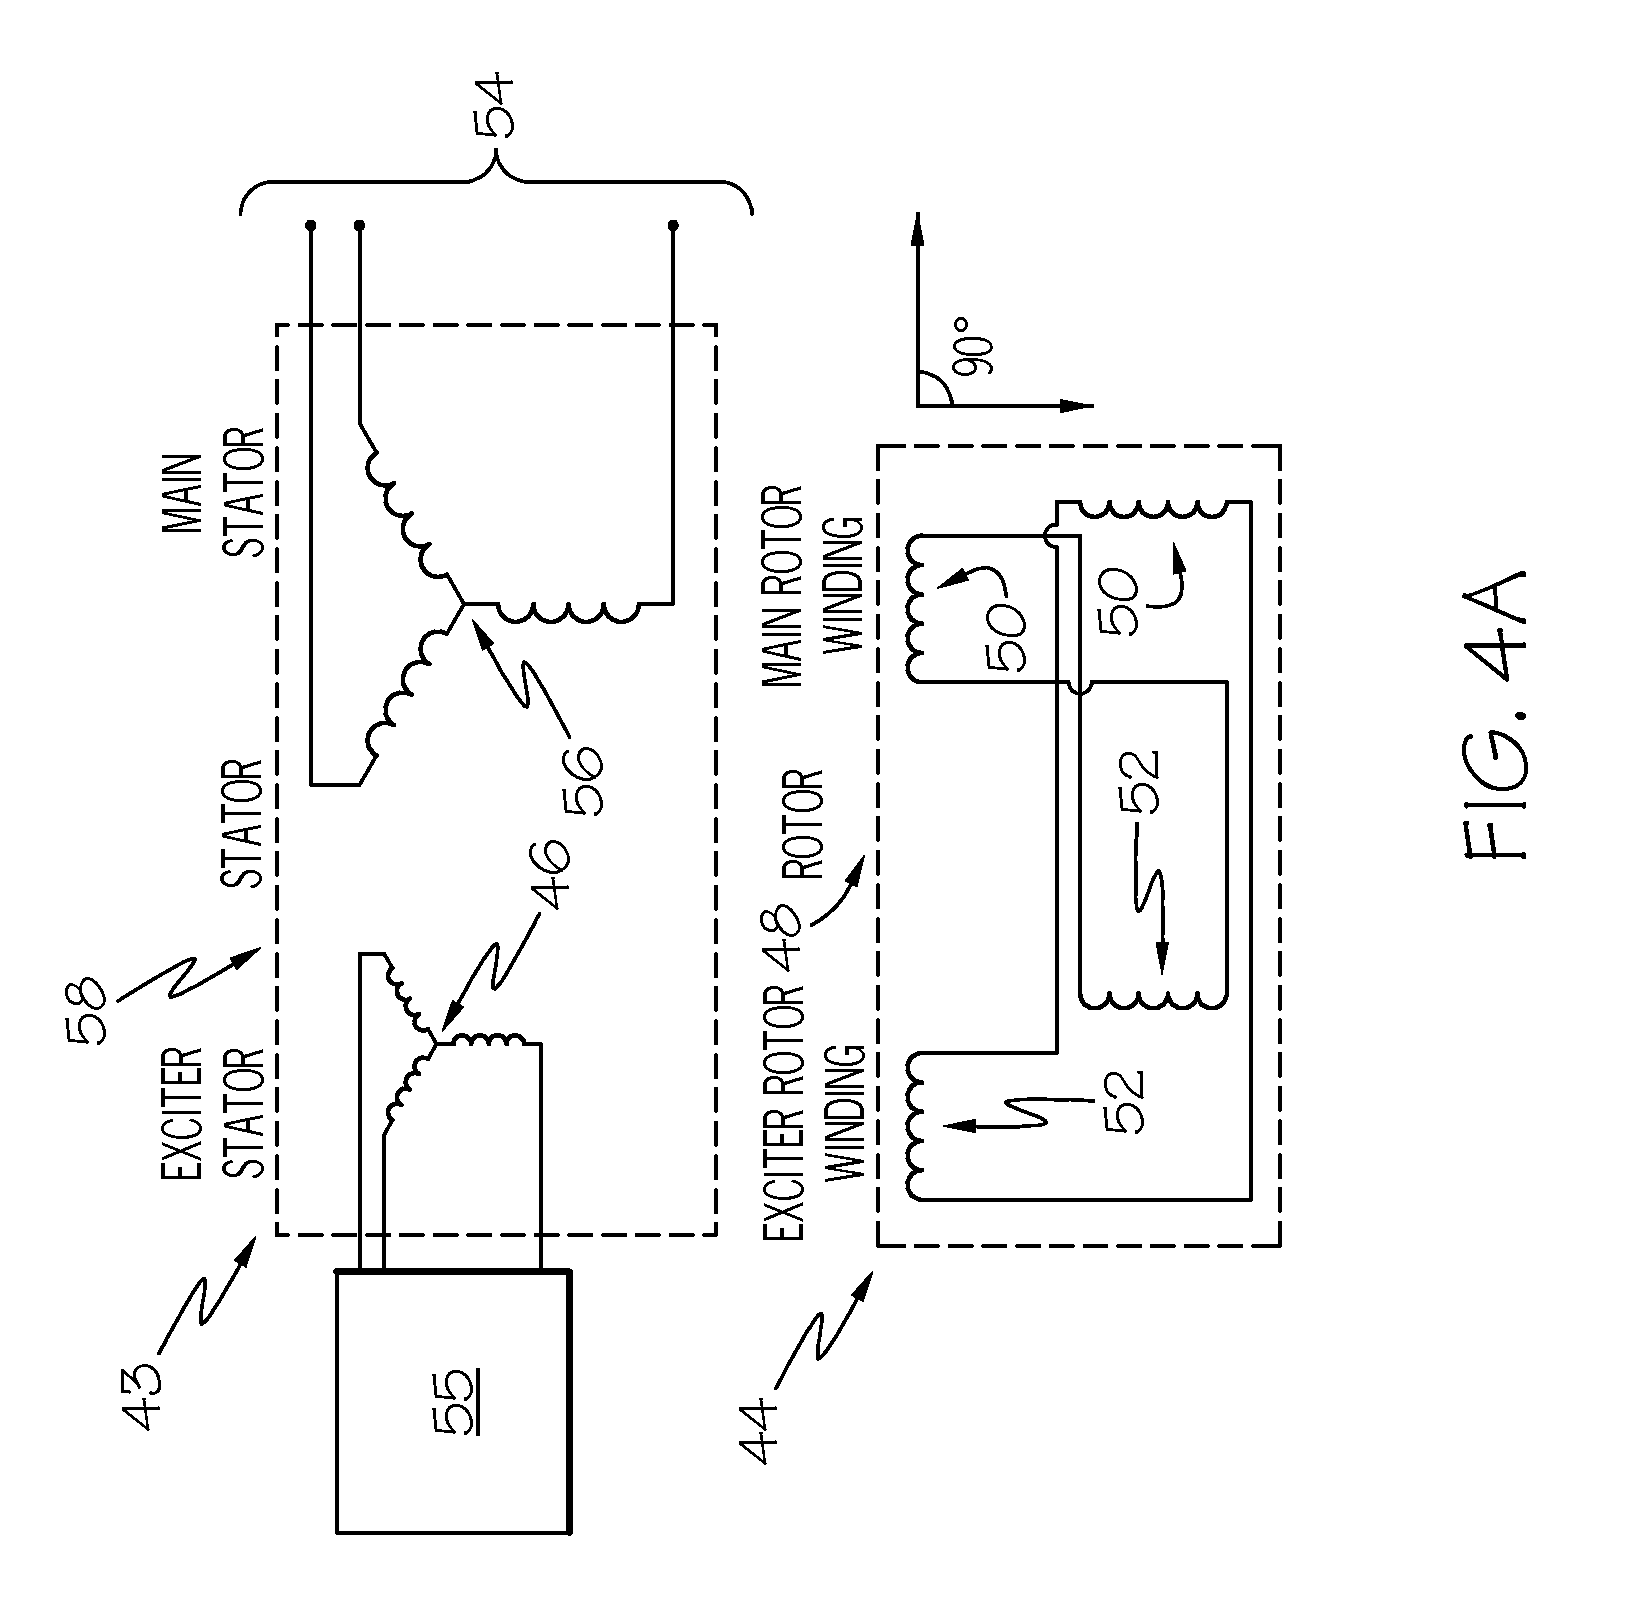 Multi-stage controlled frequency generator for direct-drive wind power